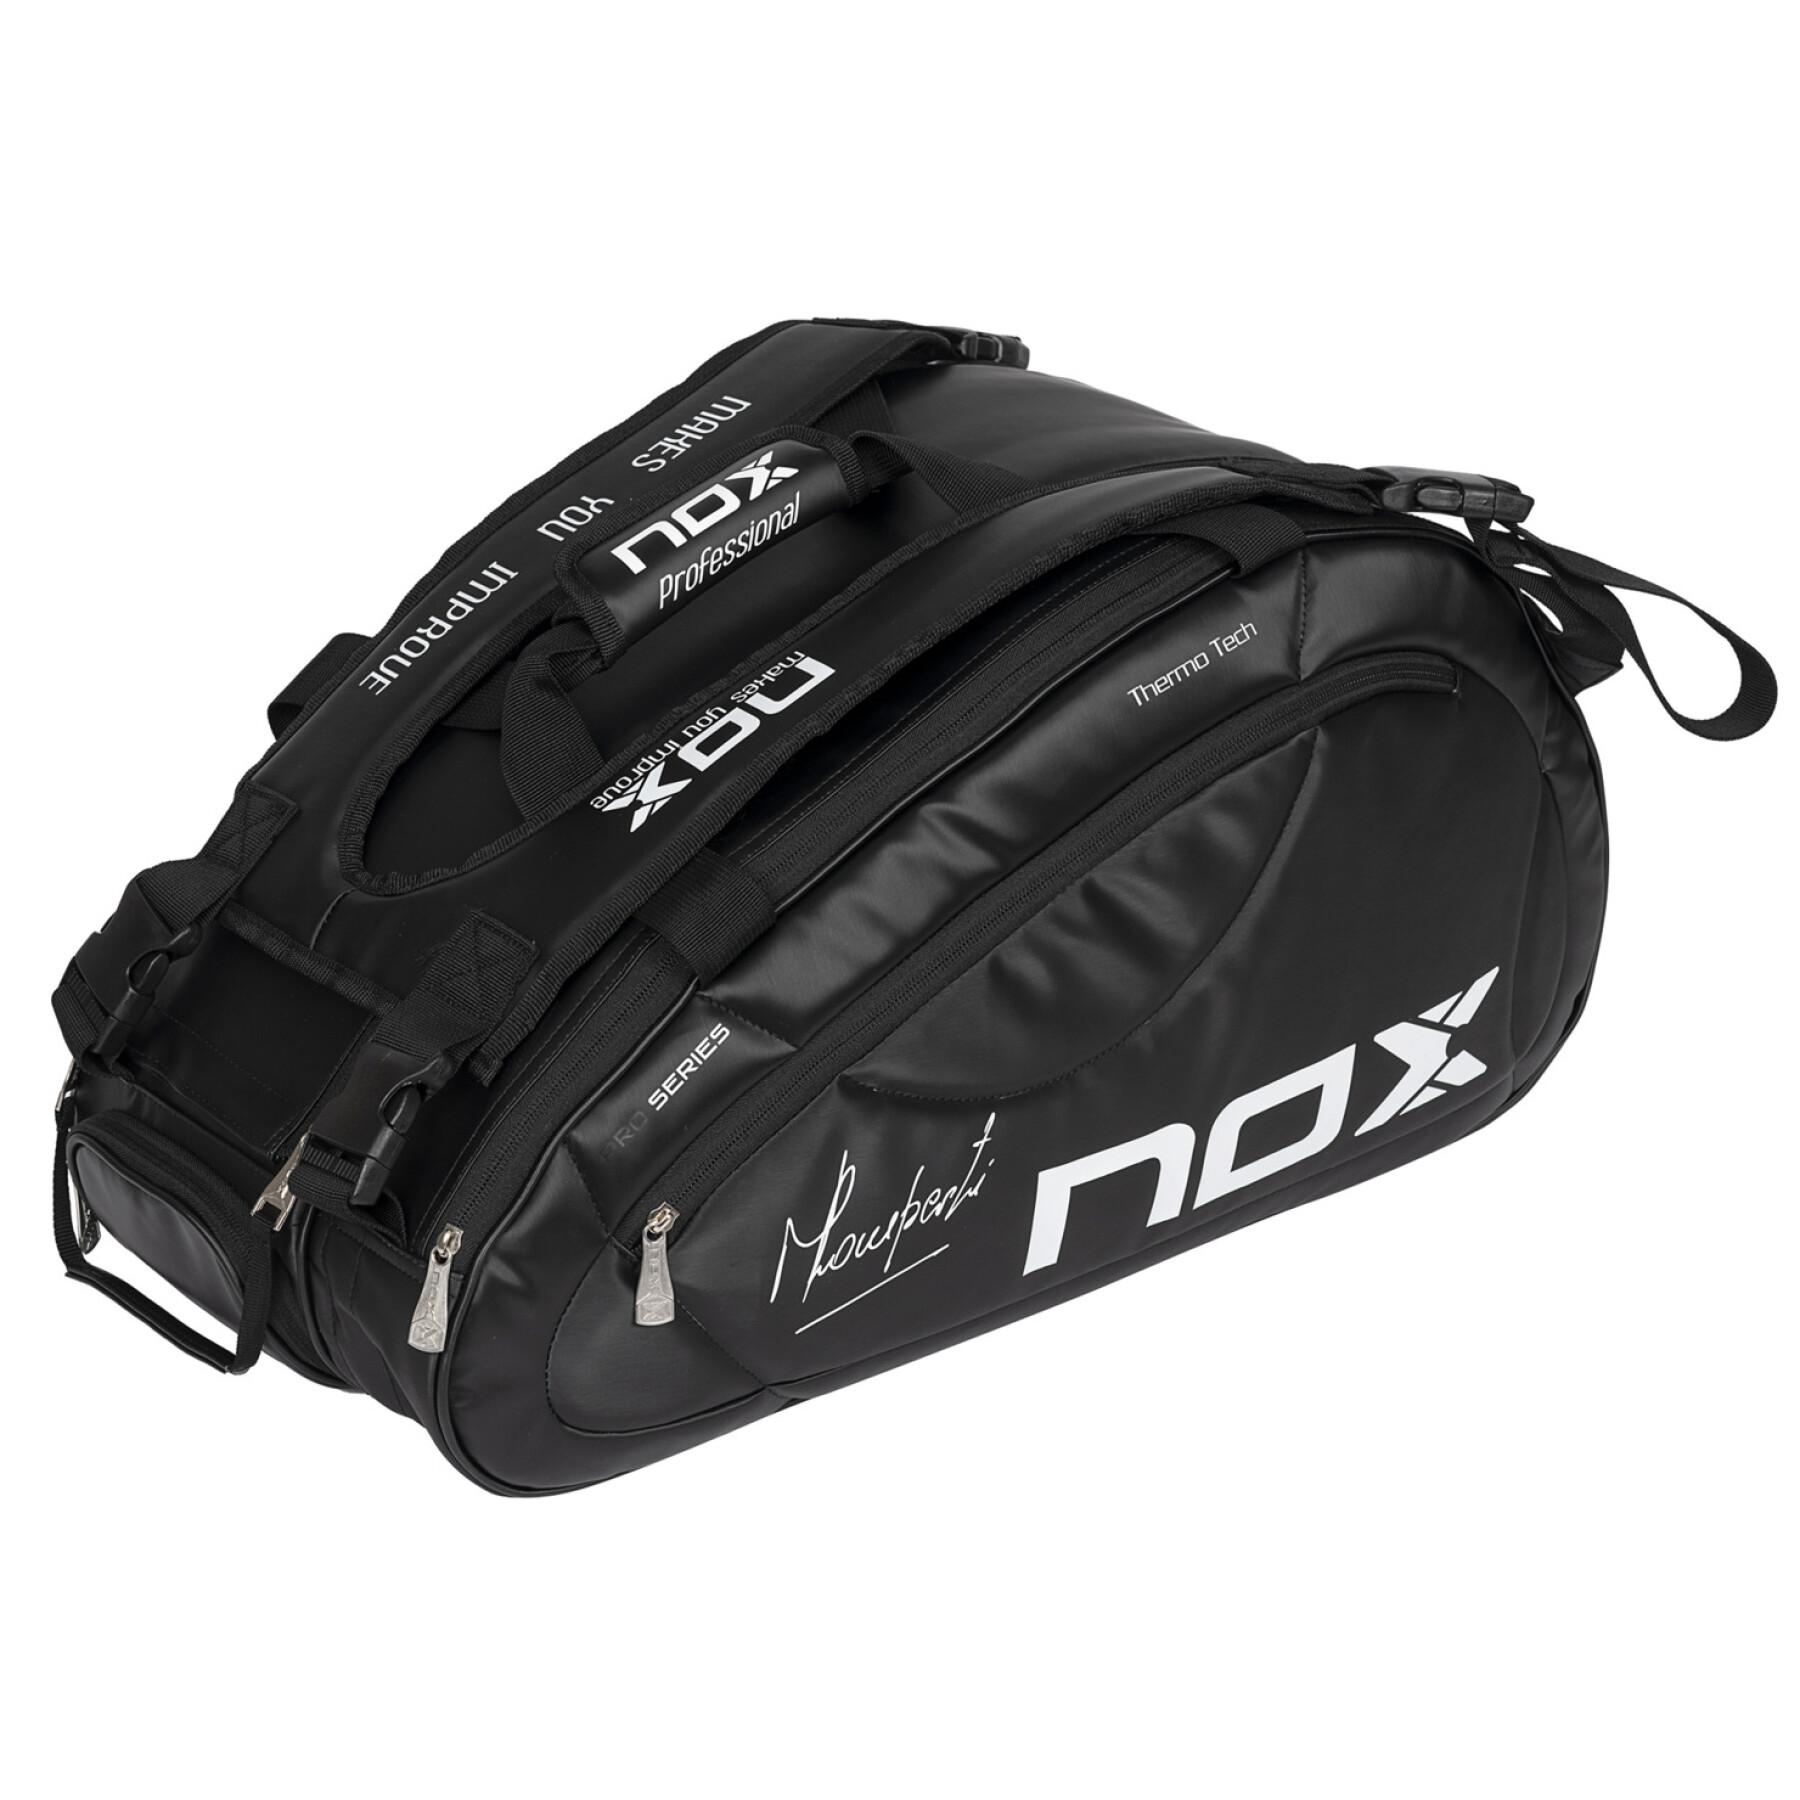 Paddle bag Nox Thermo Tour